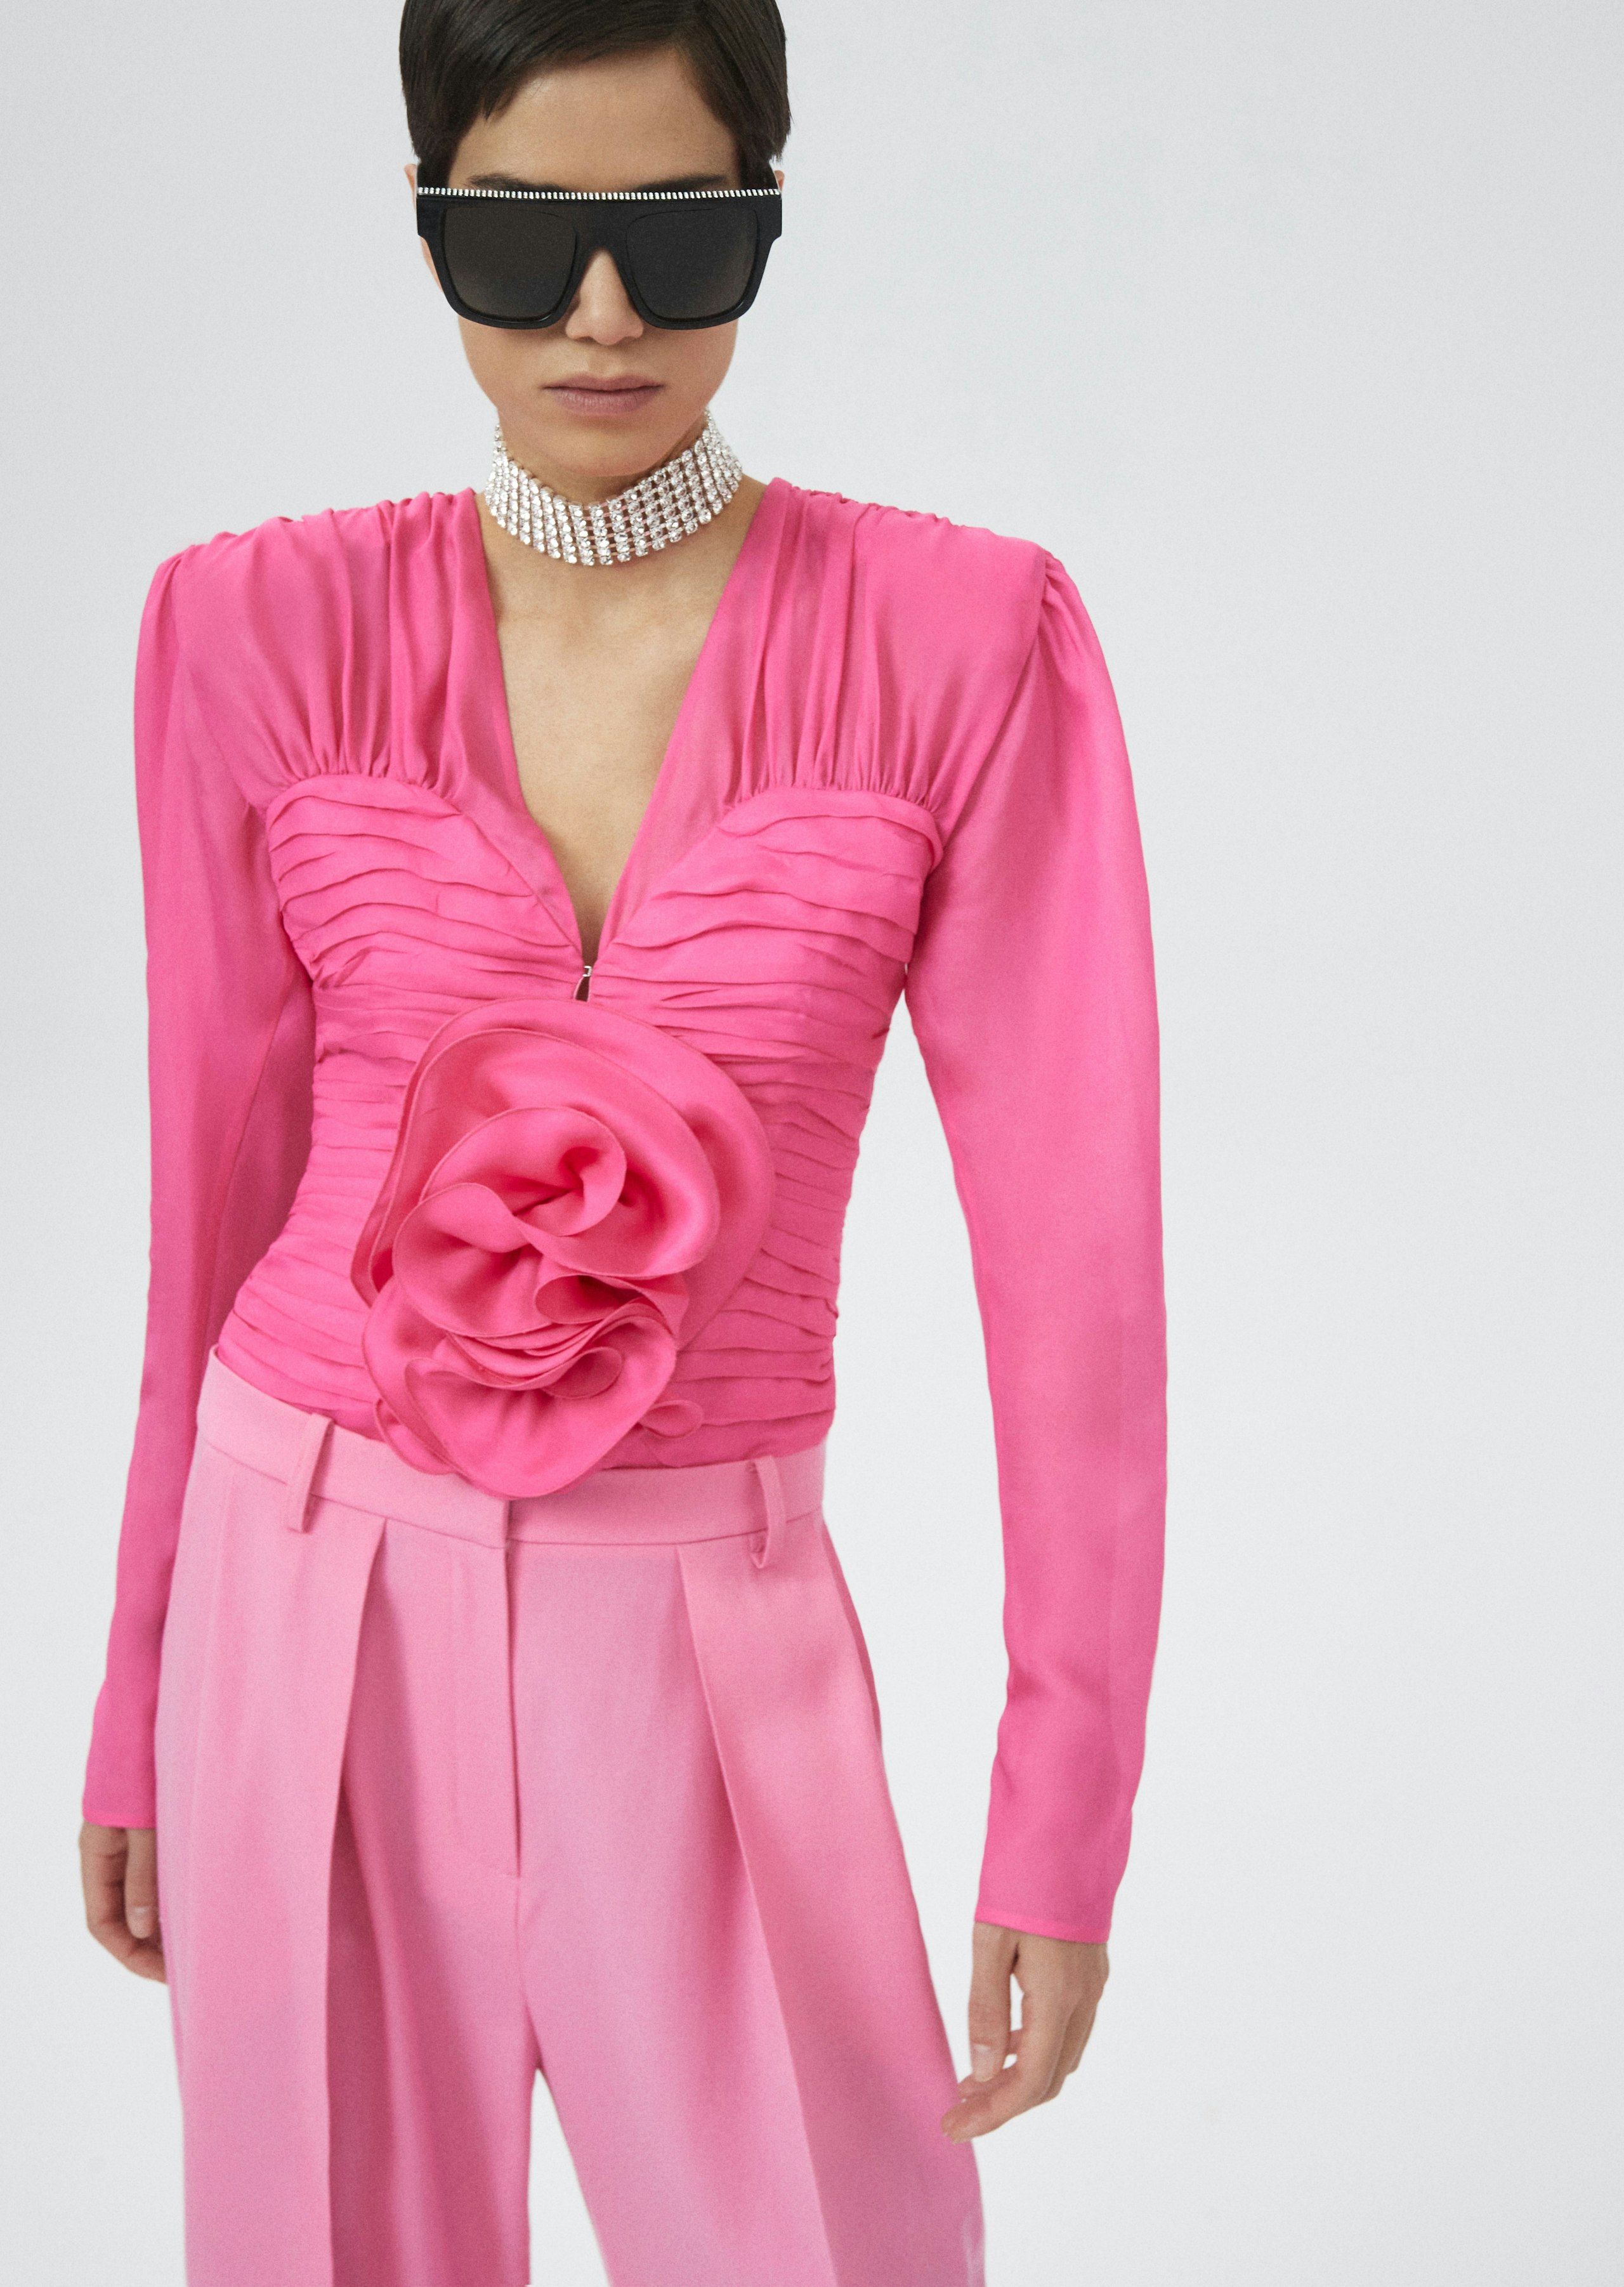 AW22 BLOUSE 09 PINK